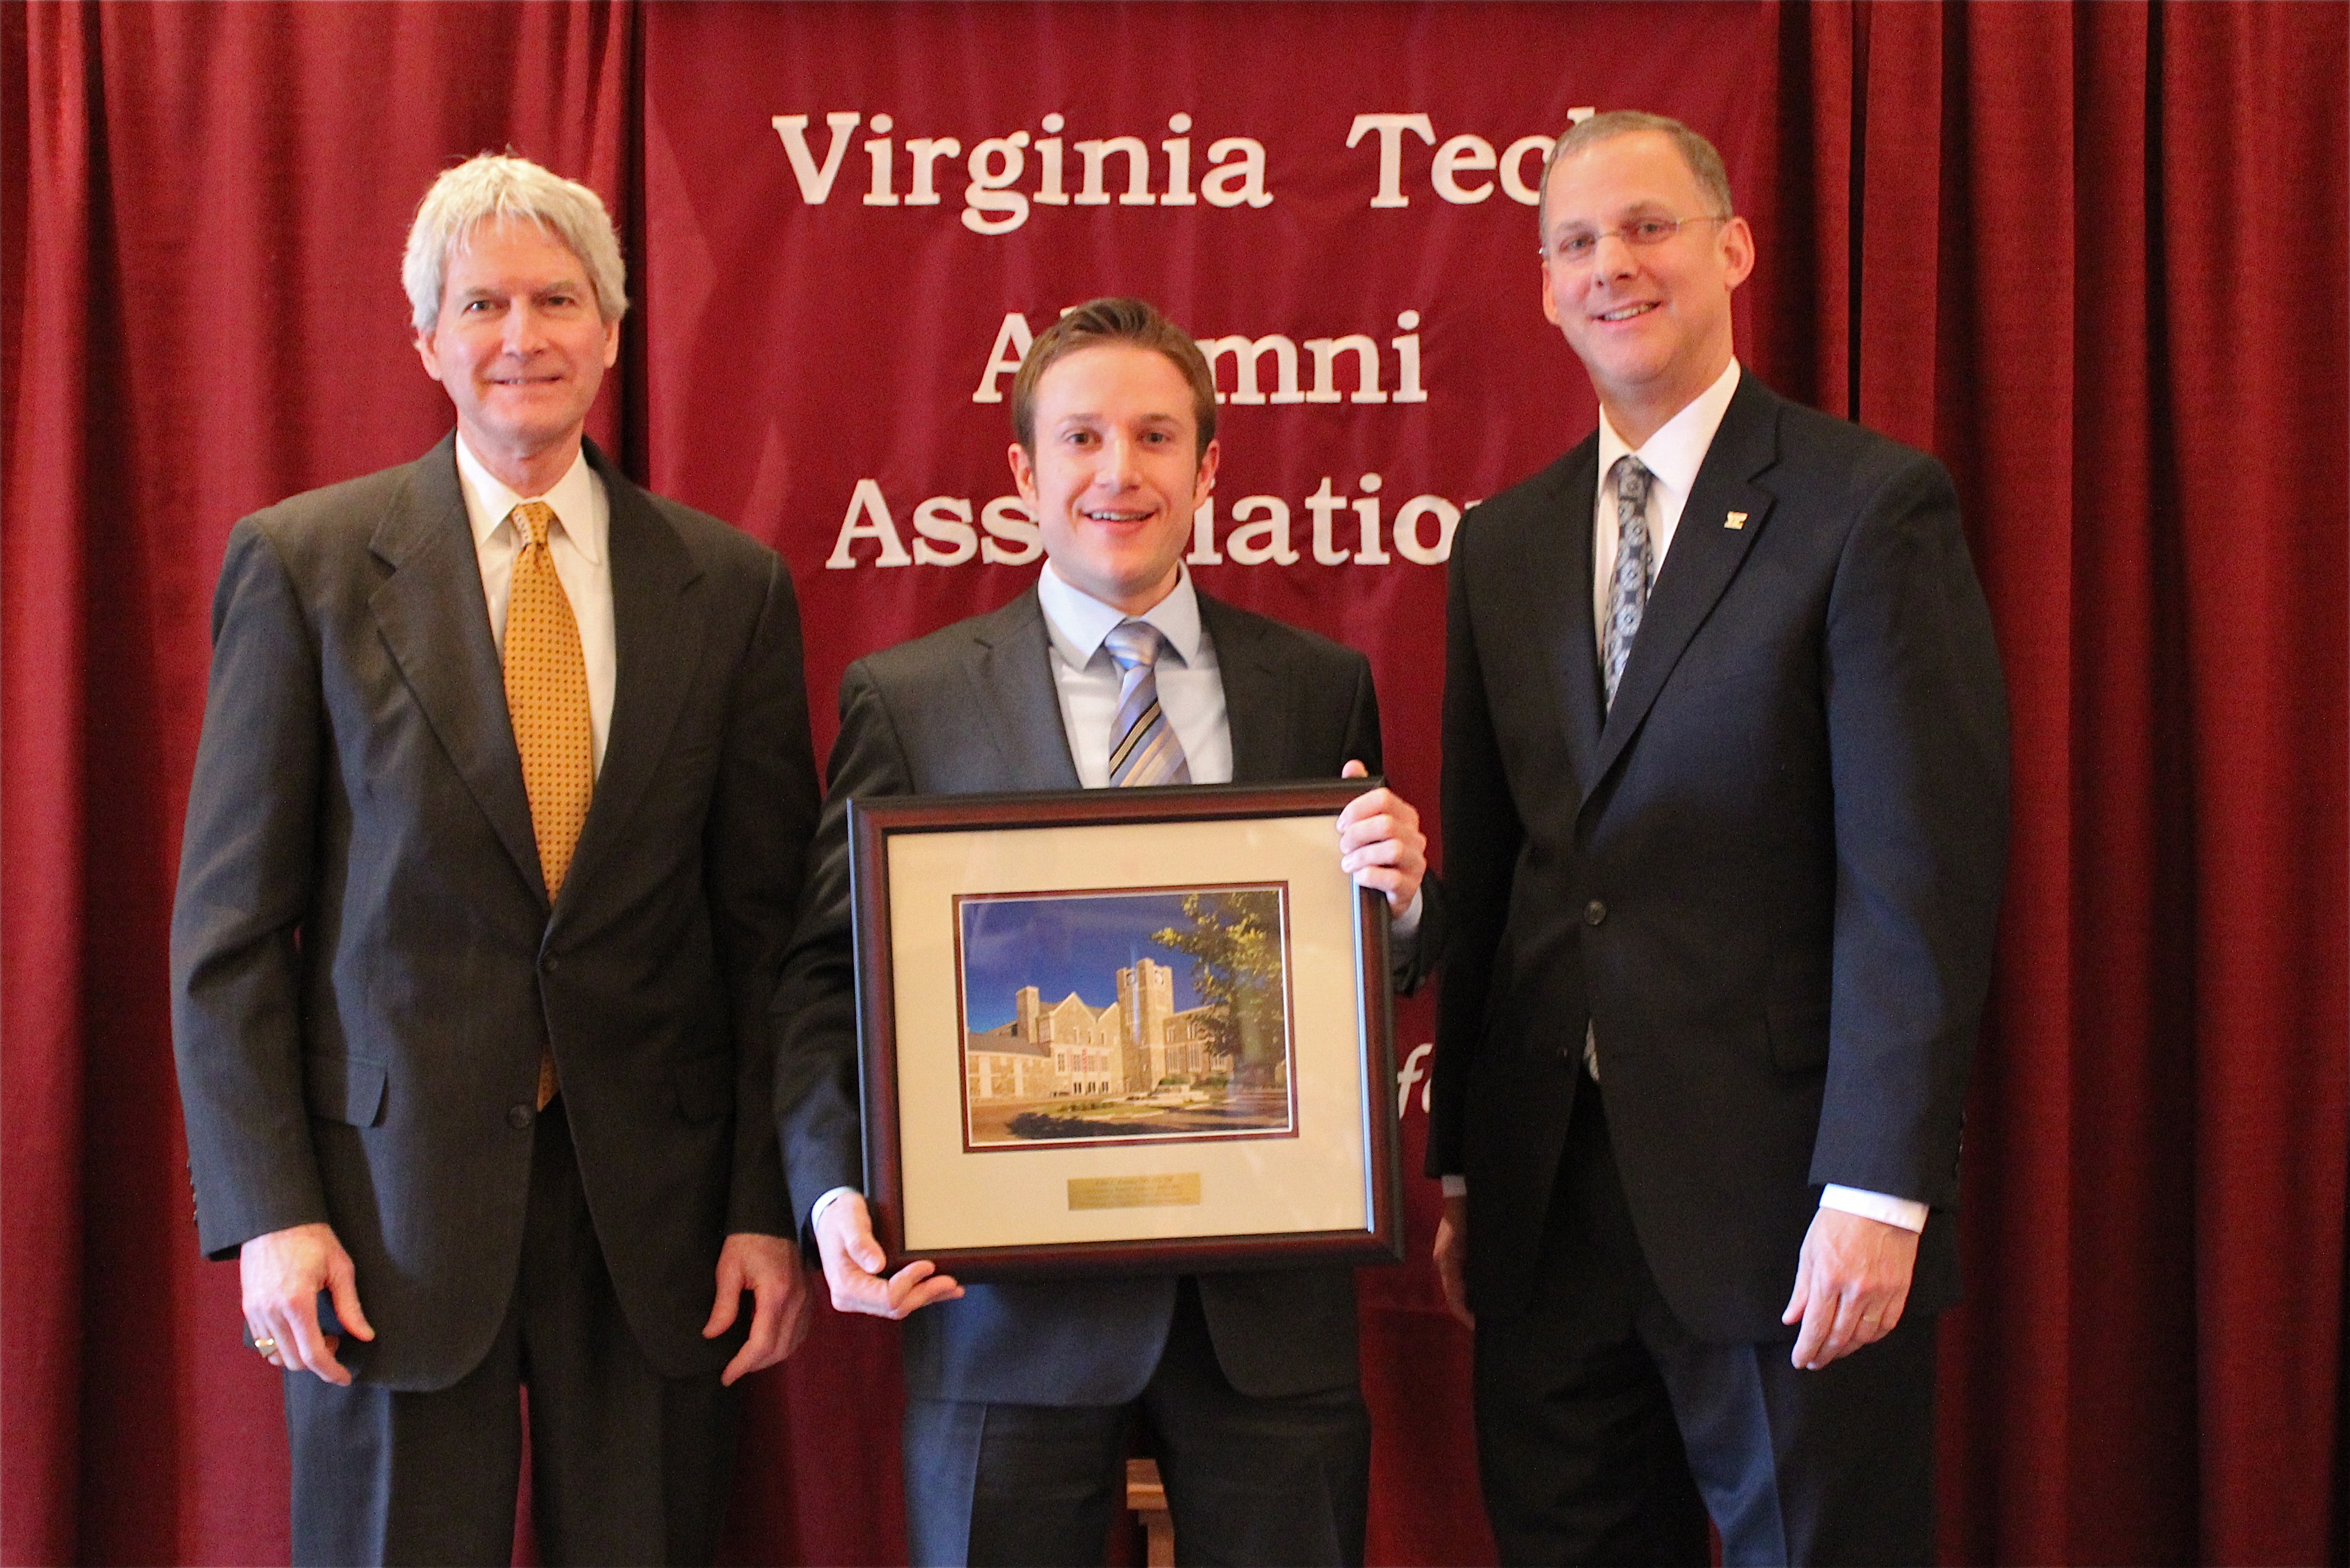 Thomas Tiller, vice president for alumni relations, and Alan Grant, dean of the College of Agriculture and Life Sciences, present John L. Koontz of Oak Park, Ill. with the annual Outstanding Recent Alumni Award.